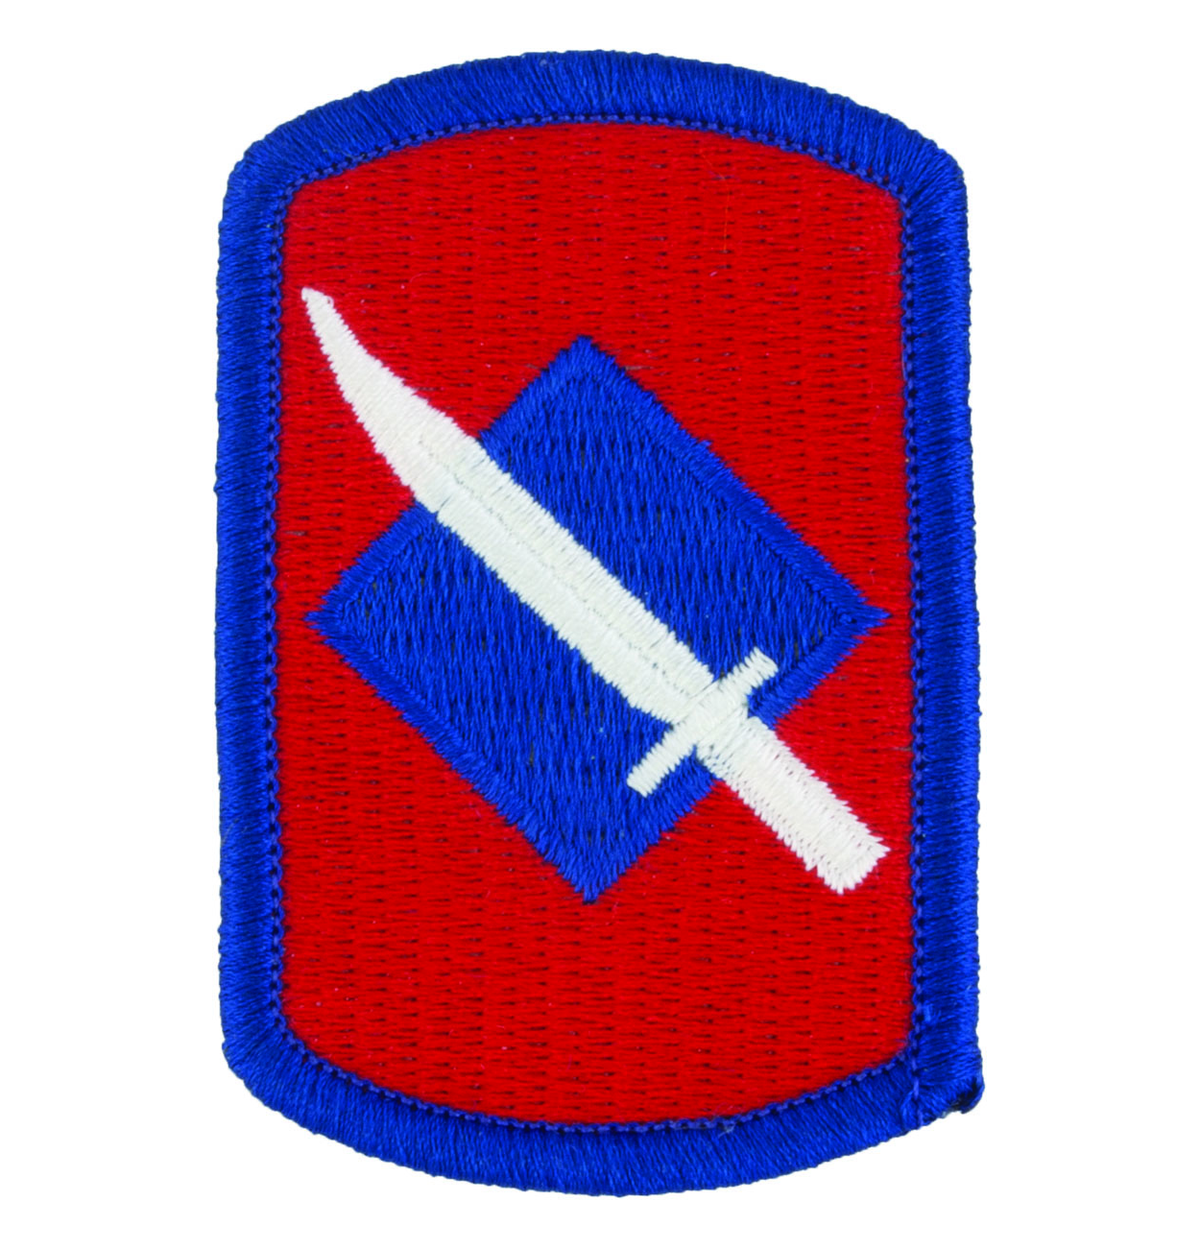 39th Infantry Brigade Patch - Full Color Dress